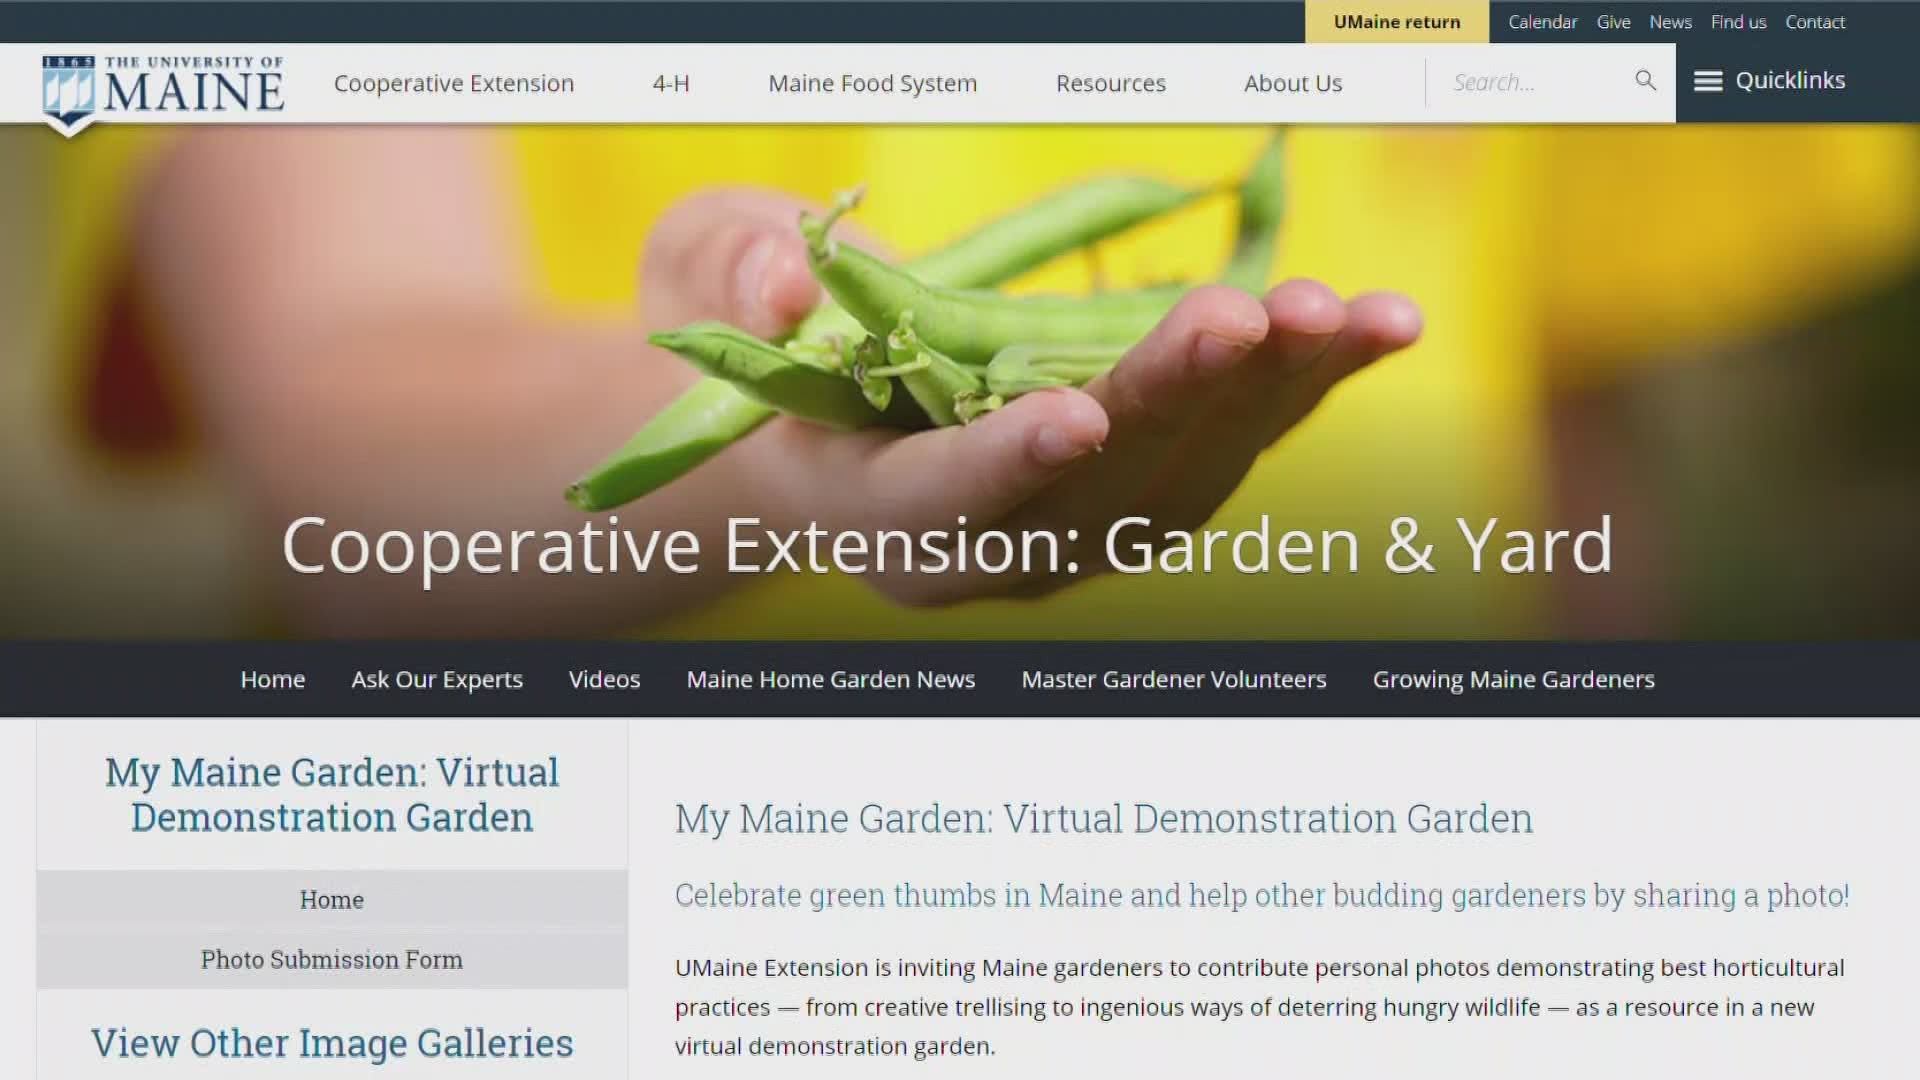 For old and new gardeners alike, the University of Maine Cooperative Extension has a new resource to help keep them connected.